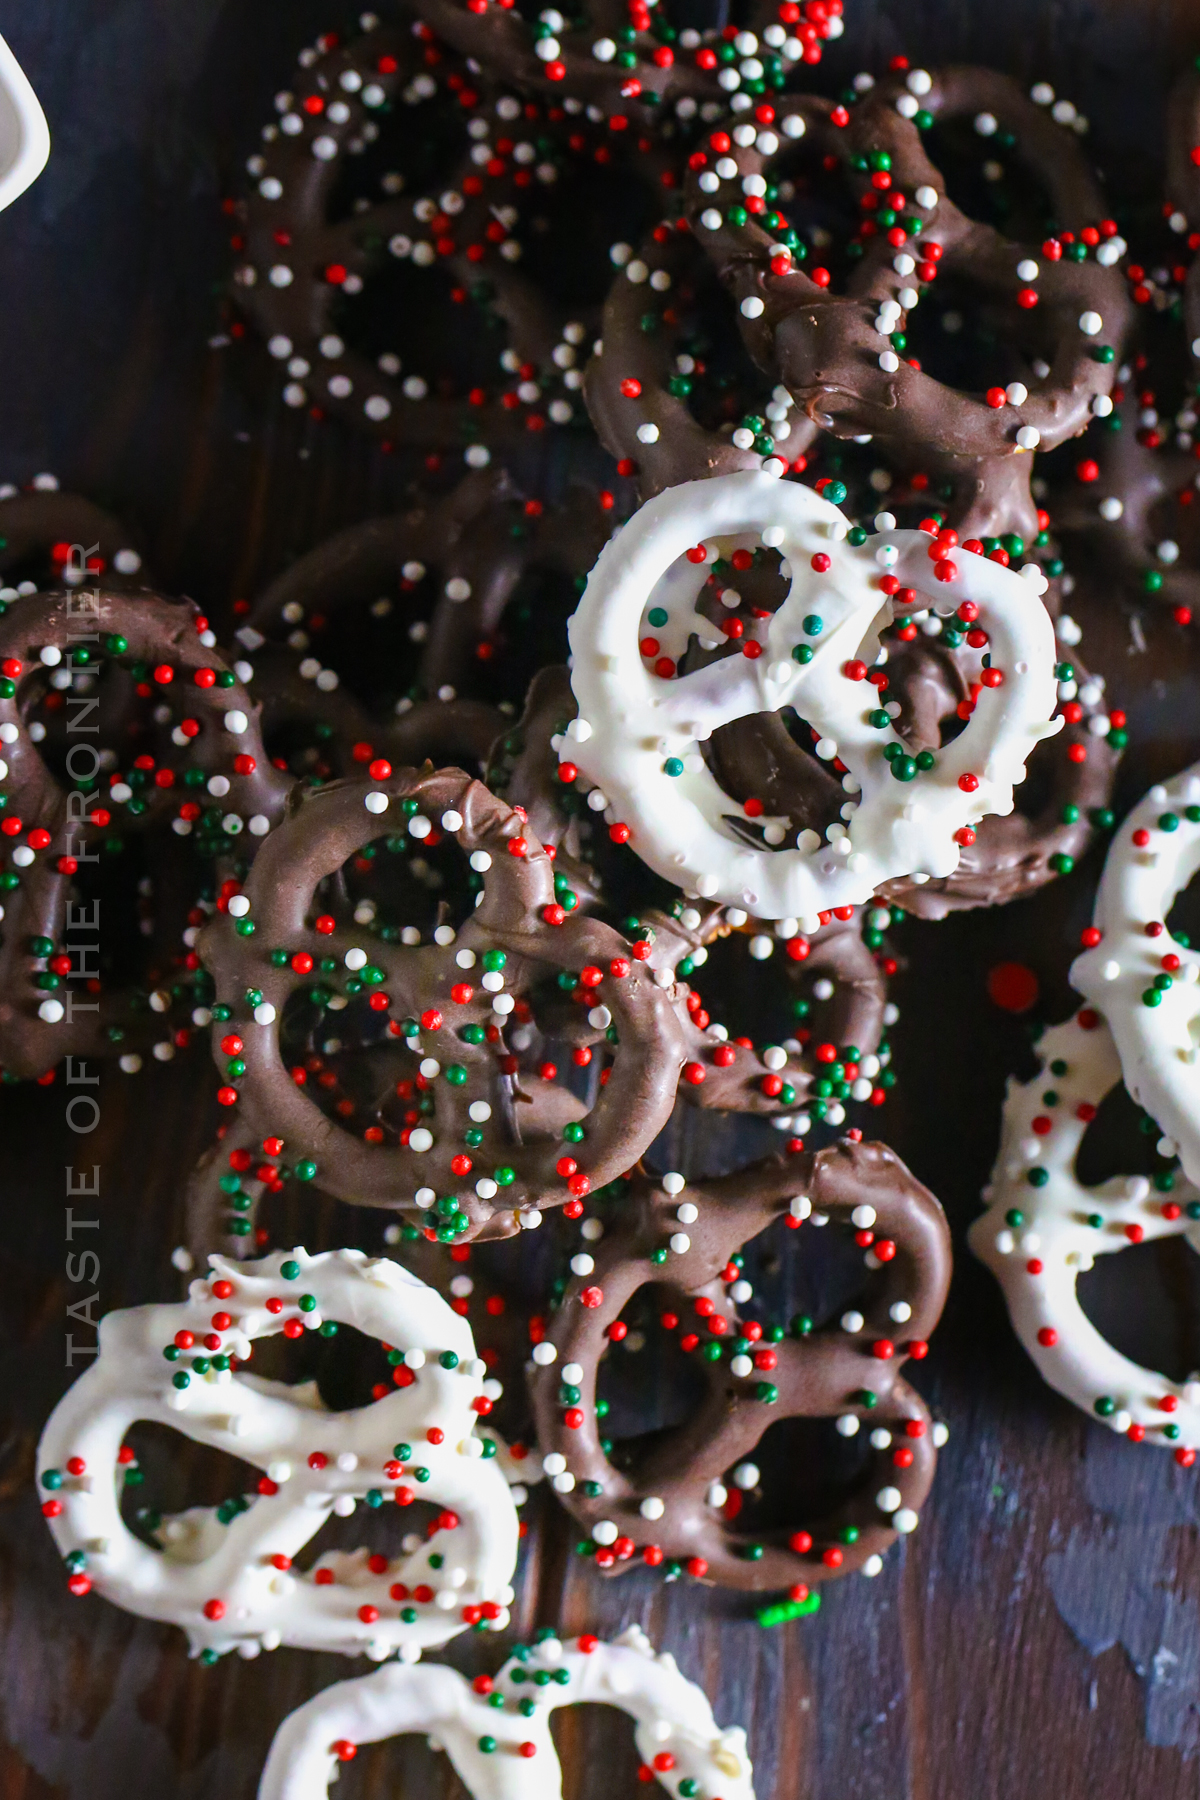 Recipe for Chocolate Covered Pretzels